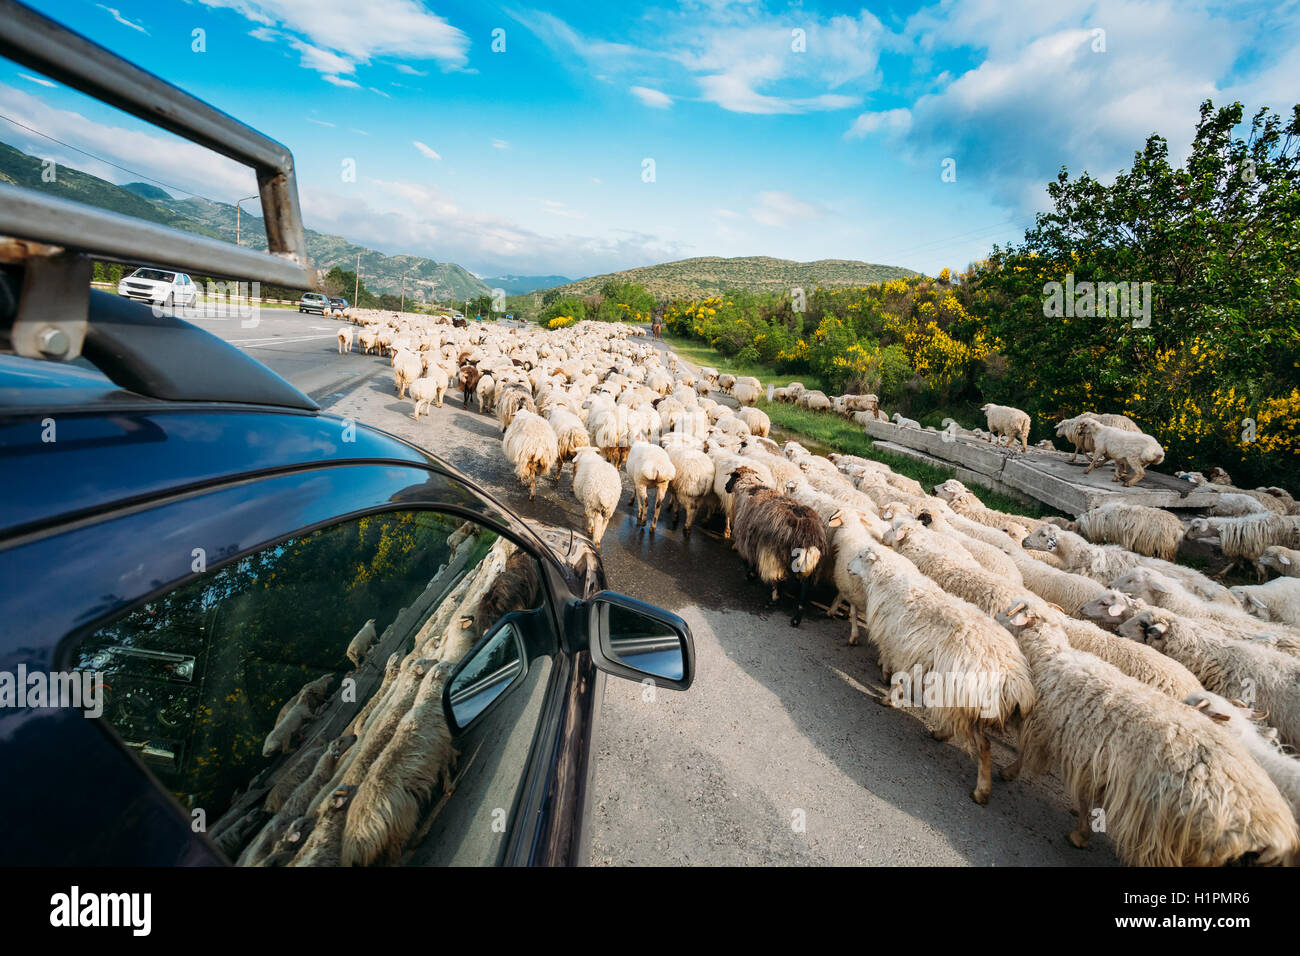 Georgia, Caucasus. The Back View From The Car Window Of Flock Of Shaggy White Sheep Moving Along The Highway In The Countryside Stock Photo